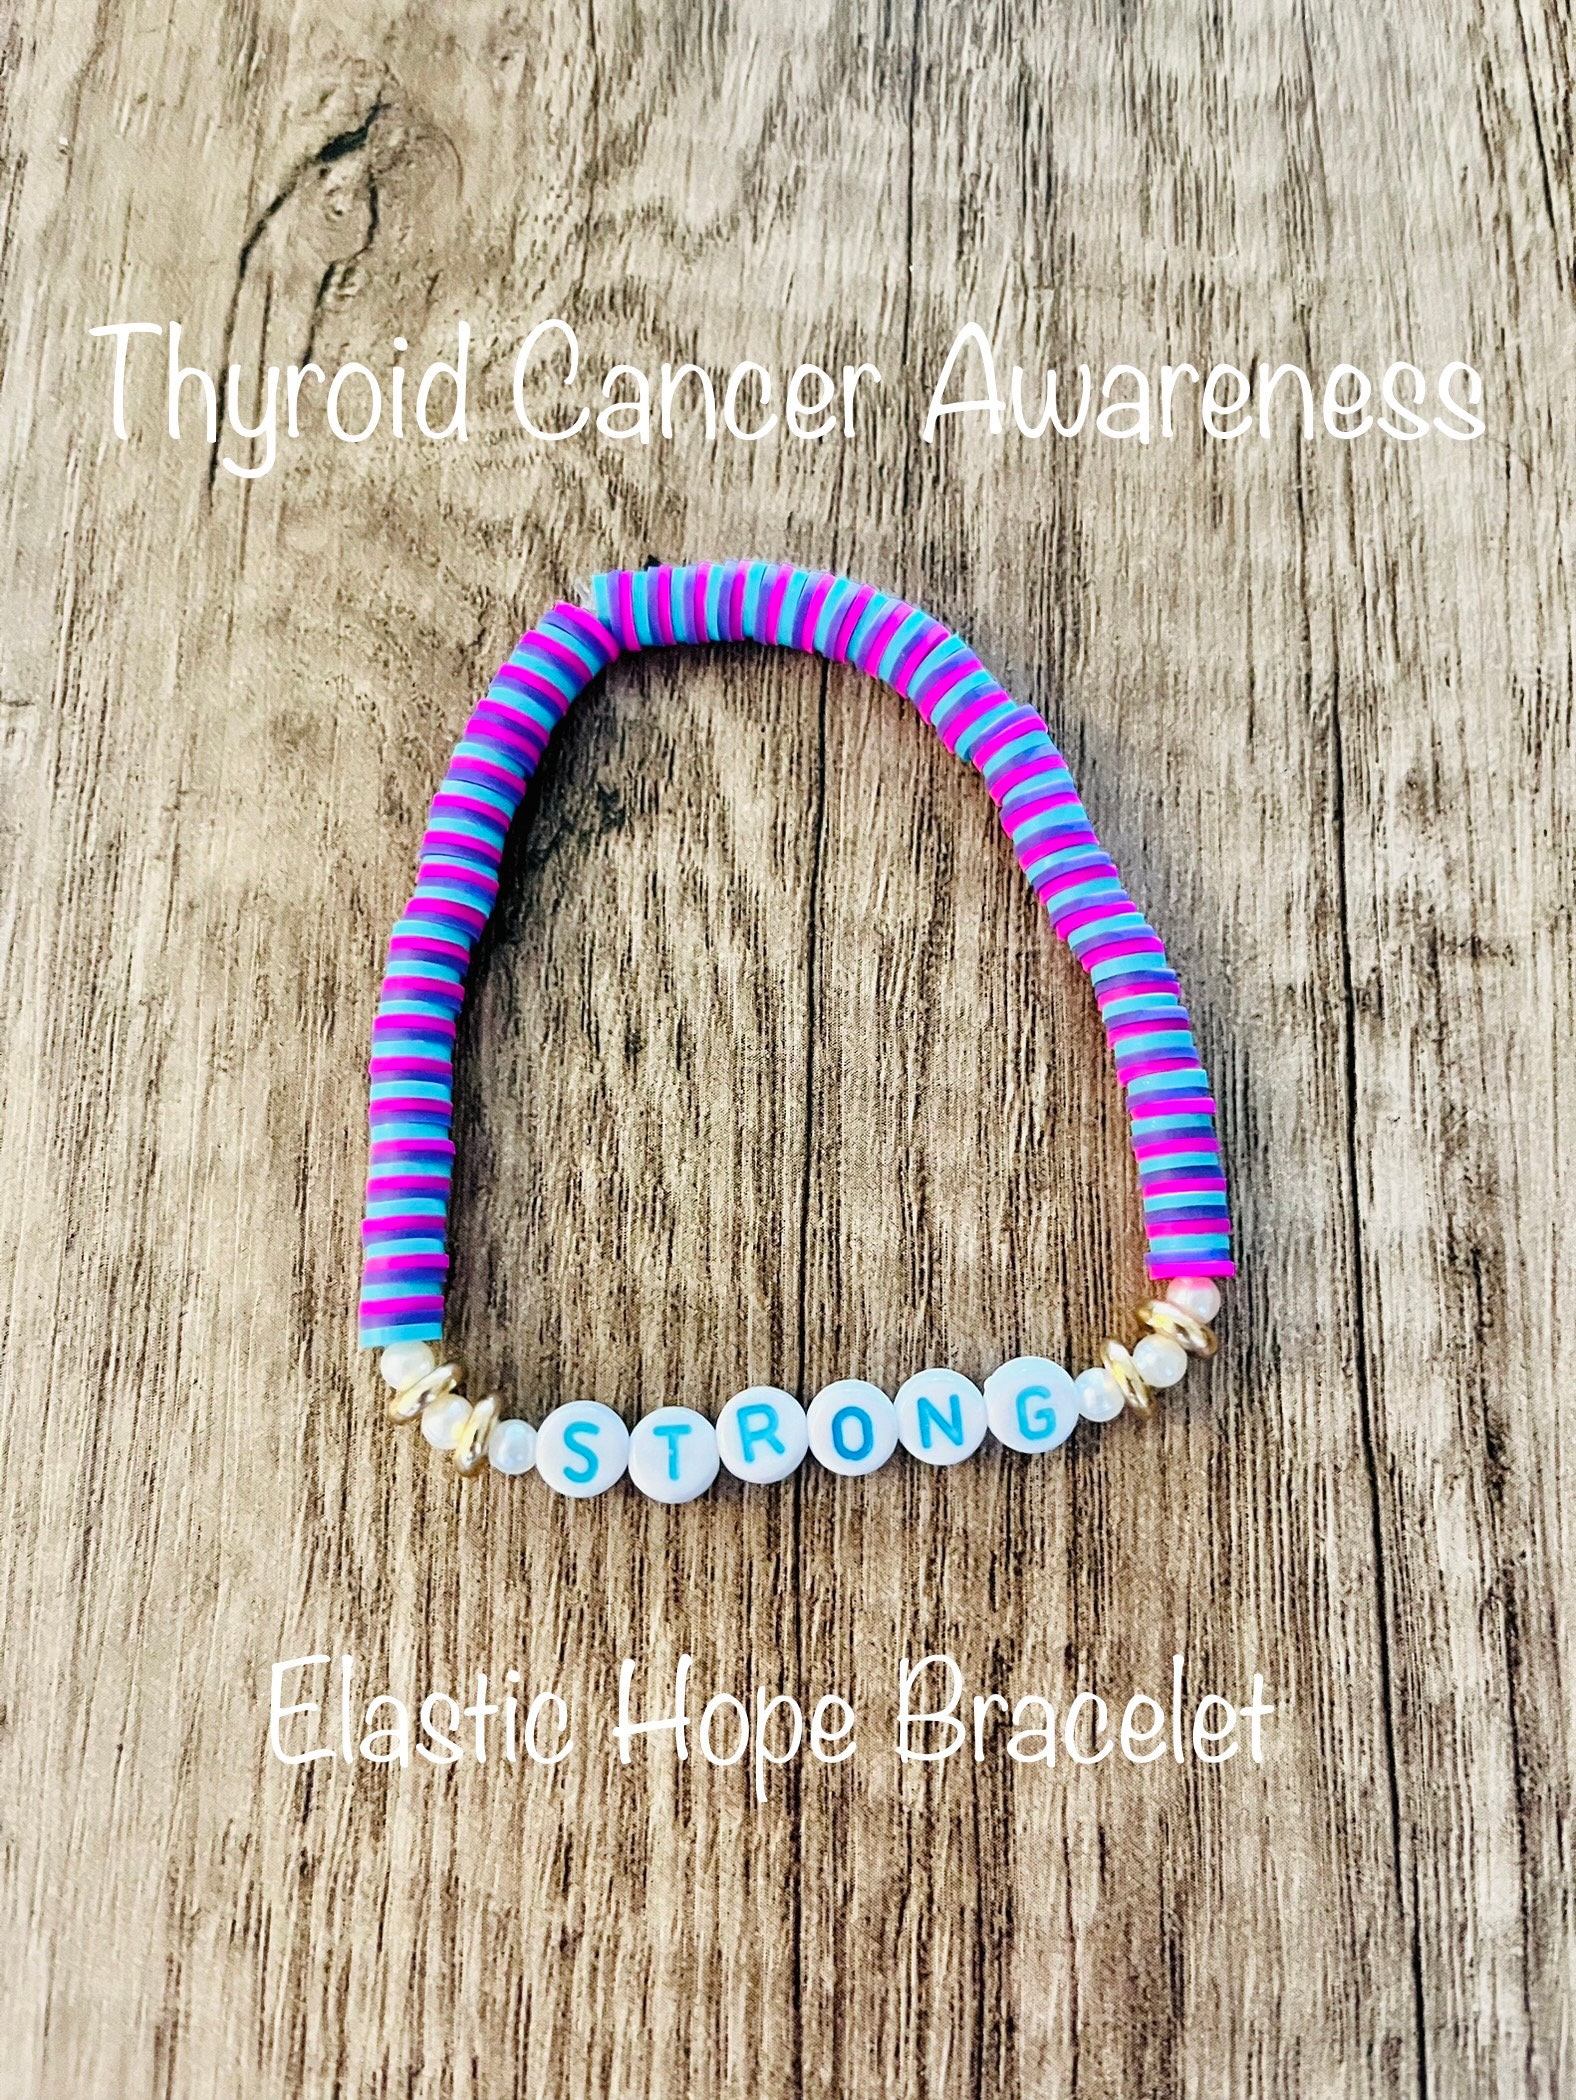 Thyroid Cancer Survivor Gifts & Merchandise for Sale | Redbubble